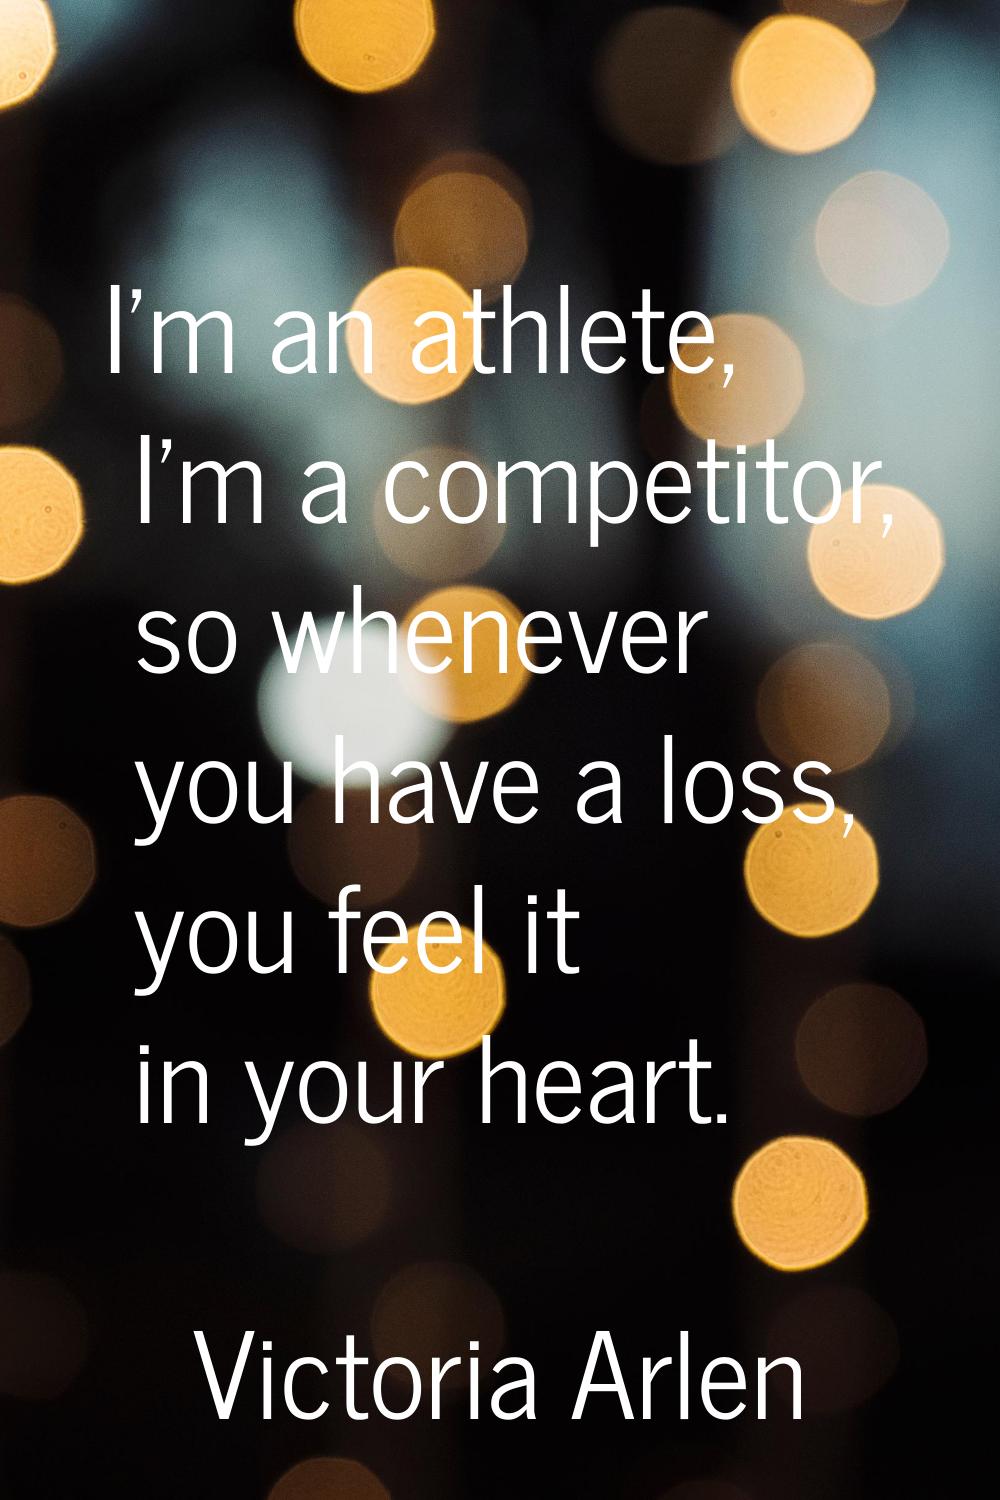 I'm an athlete, I'm a competitor, so whenever you have a loss, you feel it in your heart.